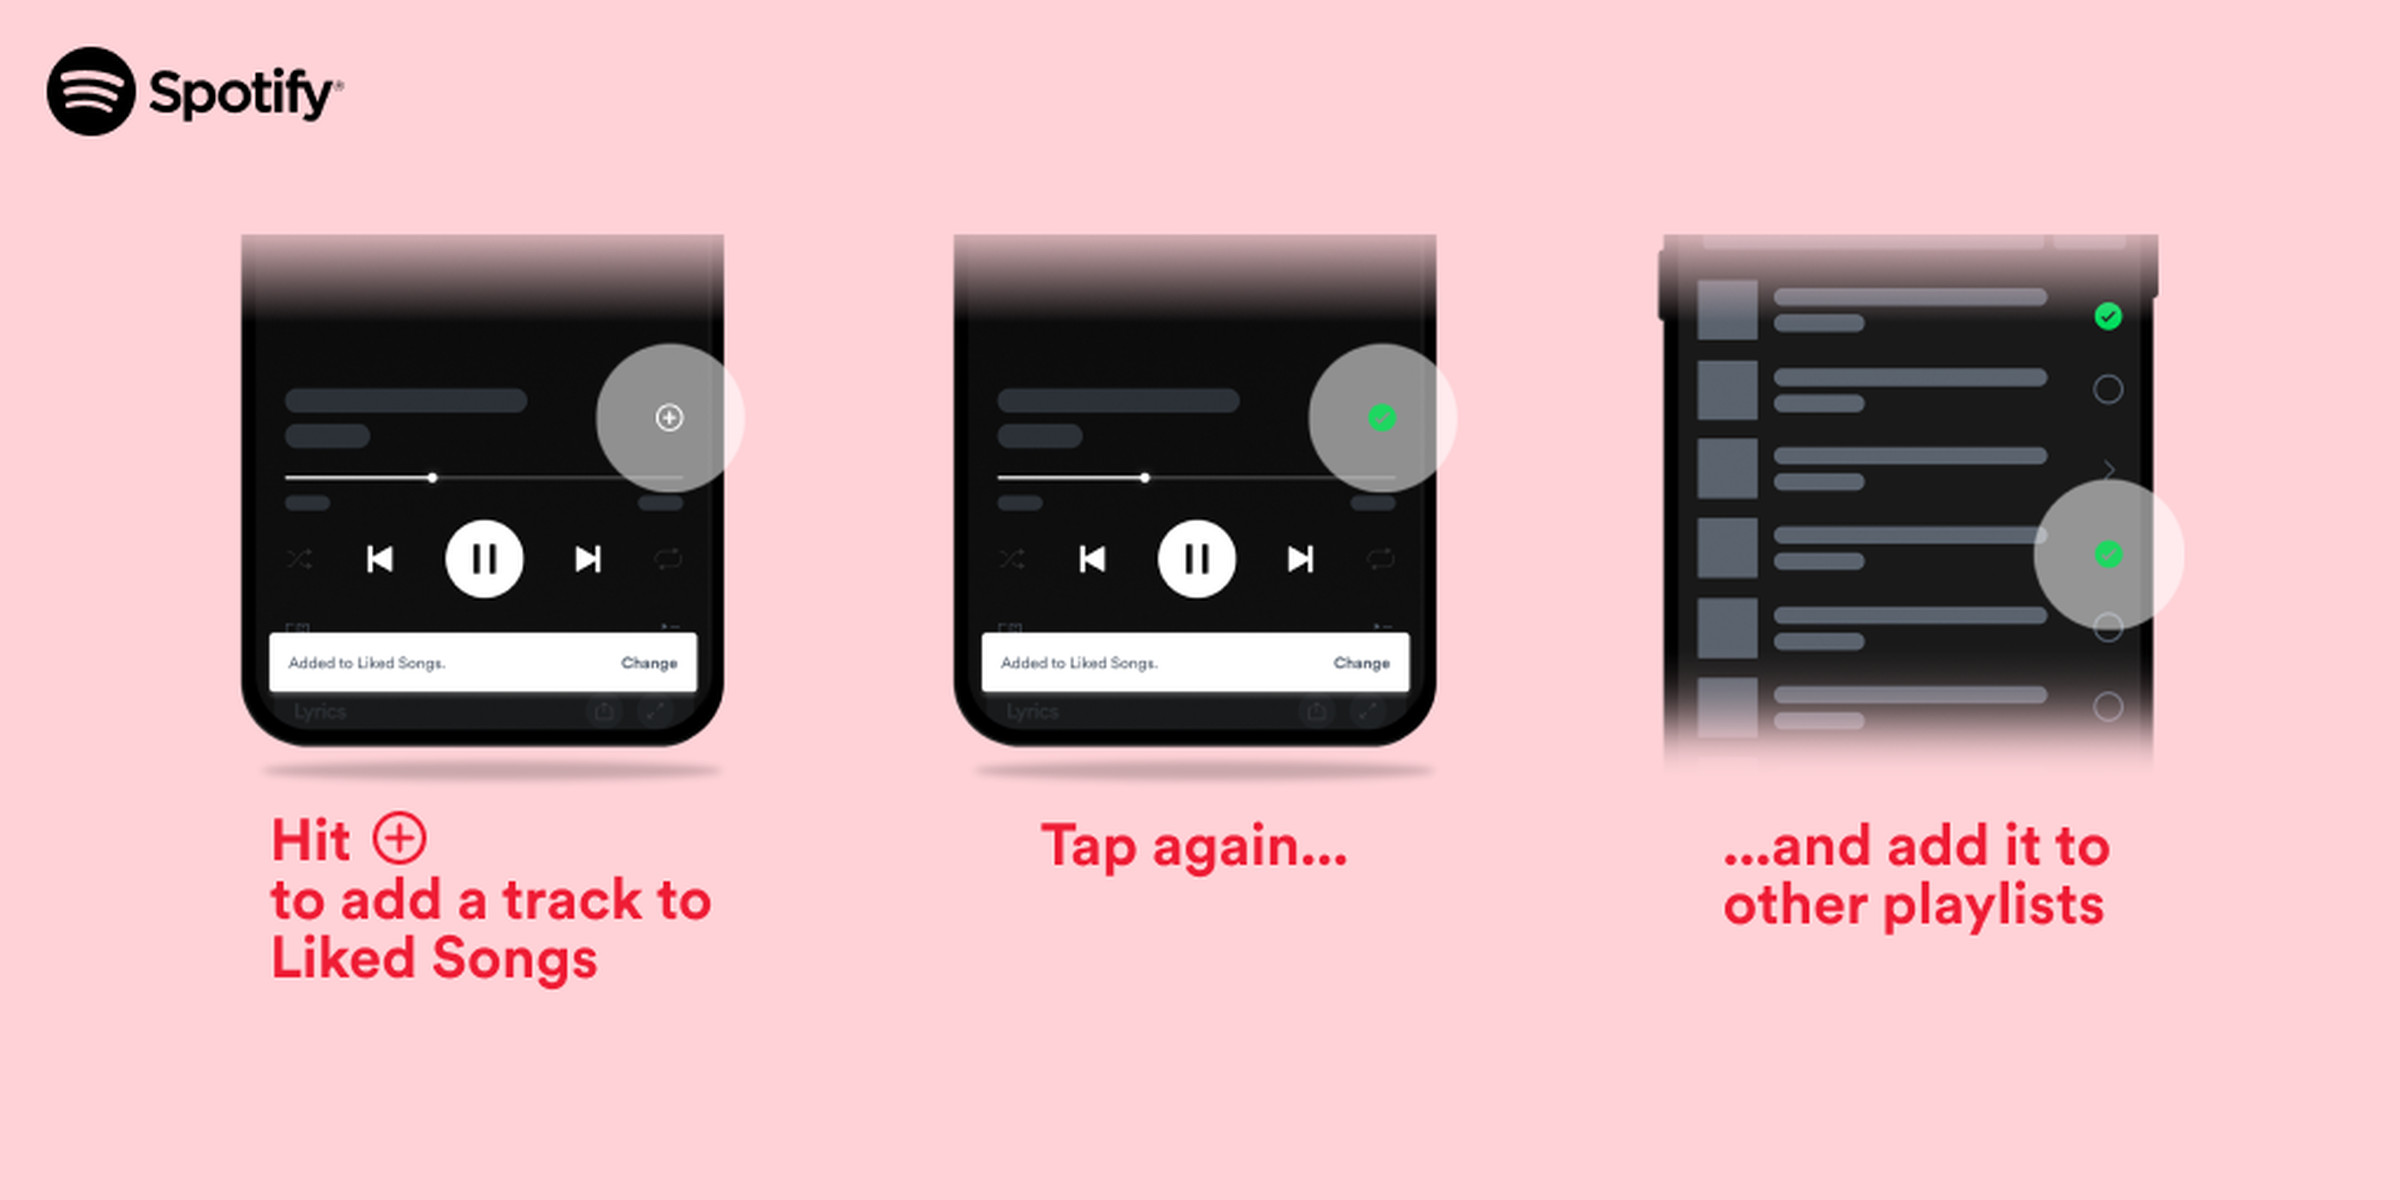 Tap once to add a song or podcast to your library, and then tap it again to add it to a playlist.